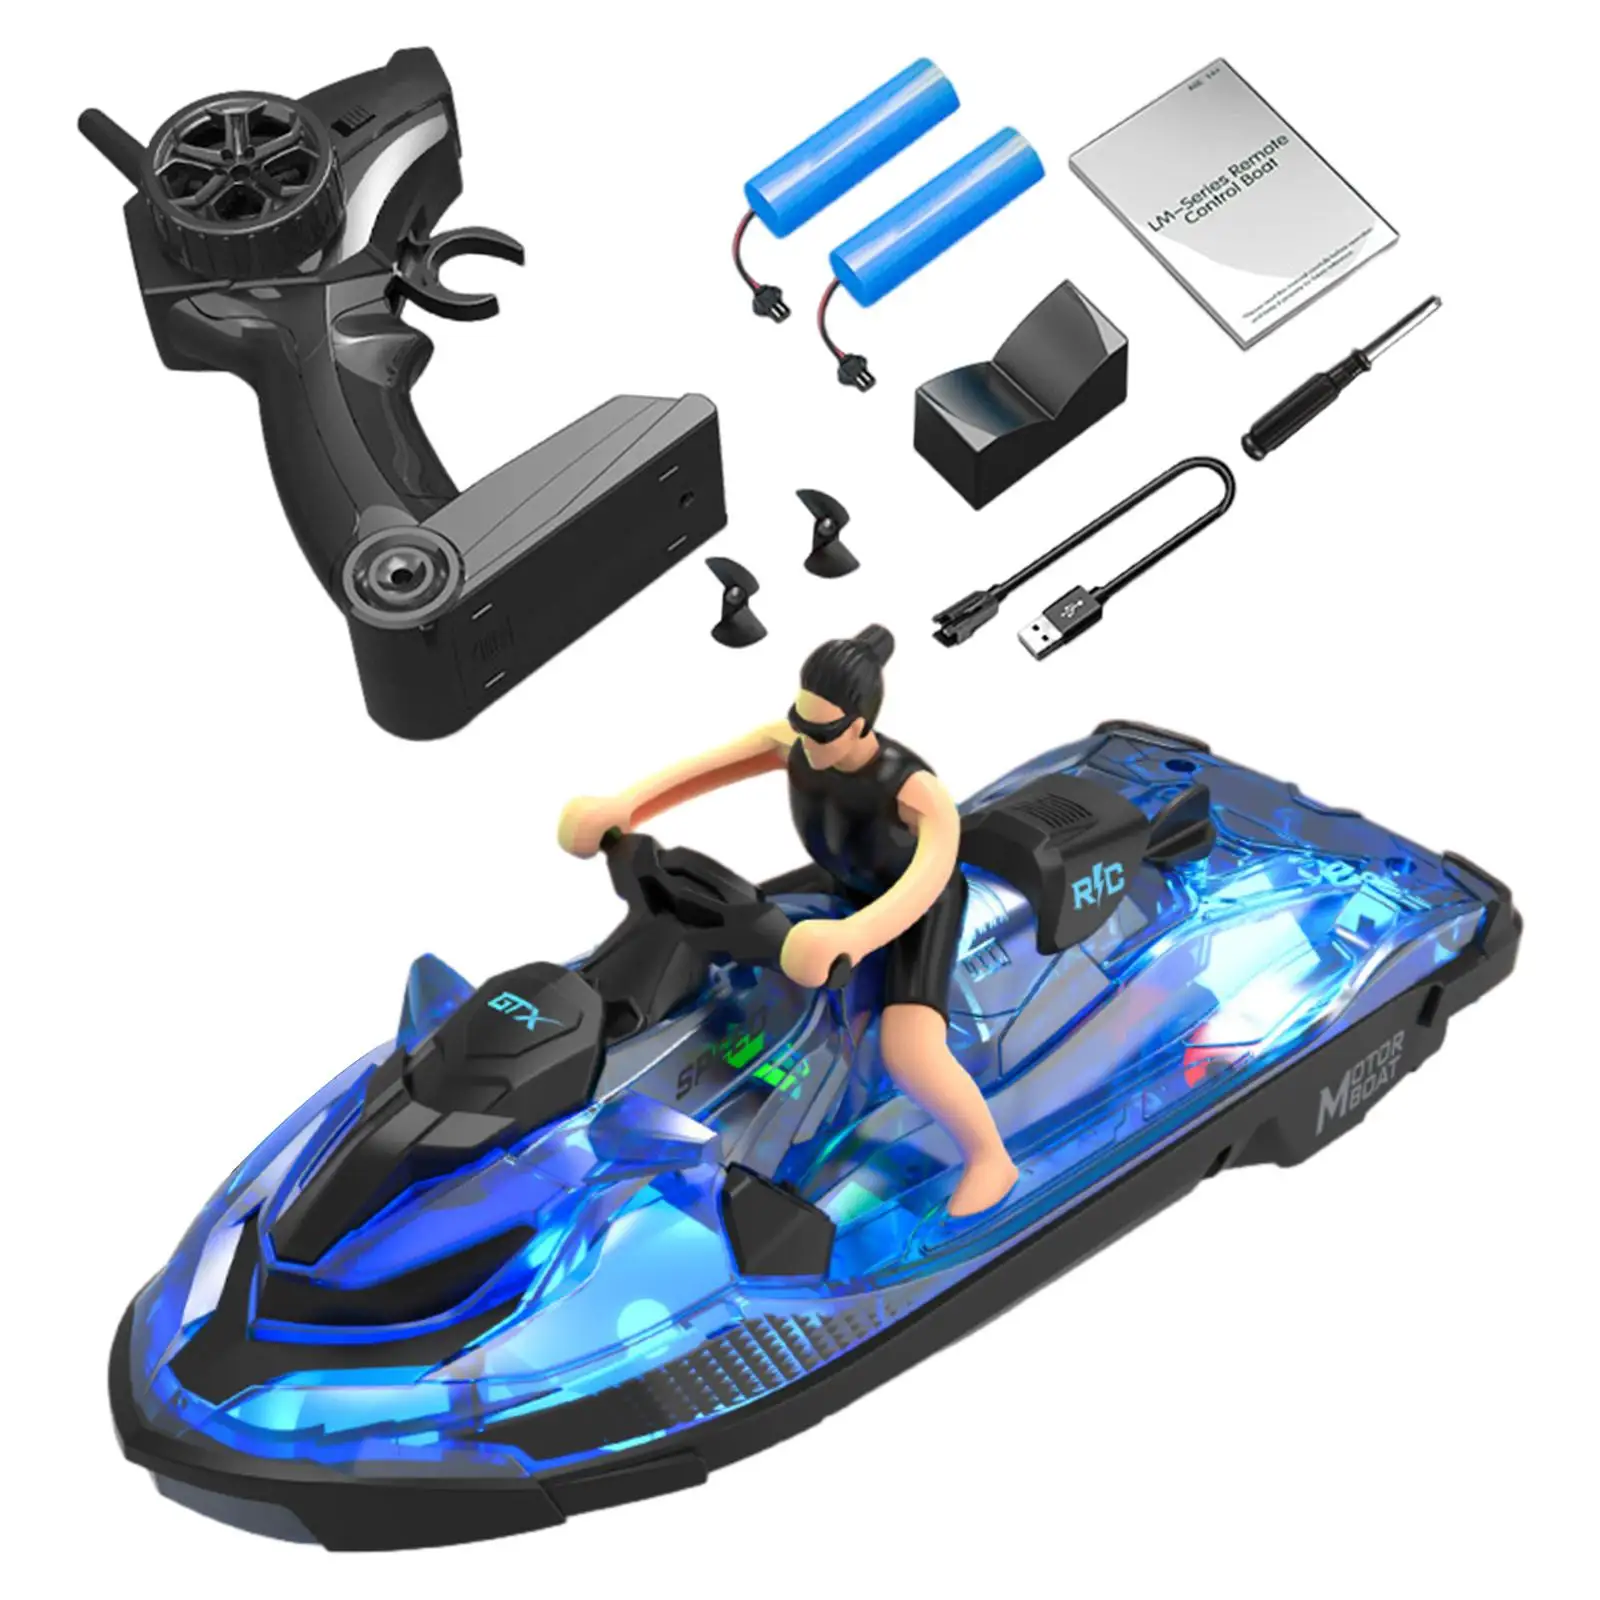 RC Boat for Pools and Lakes Fast Remote Control Boat for Kids Boys Gifts